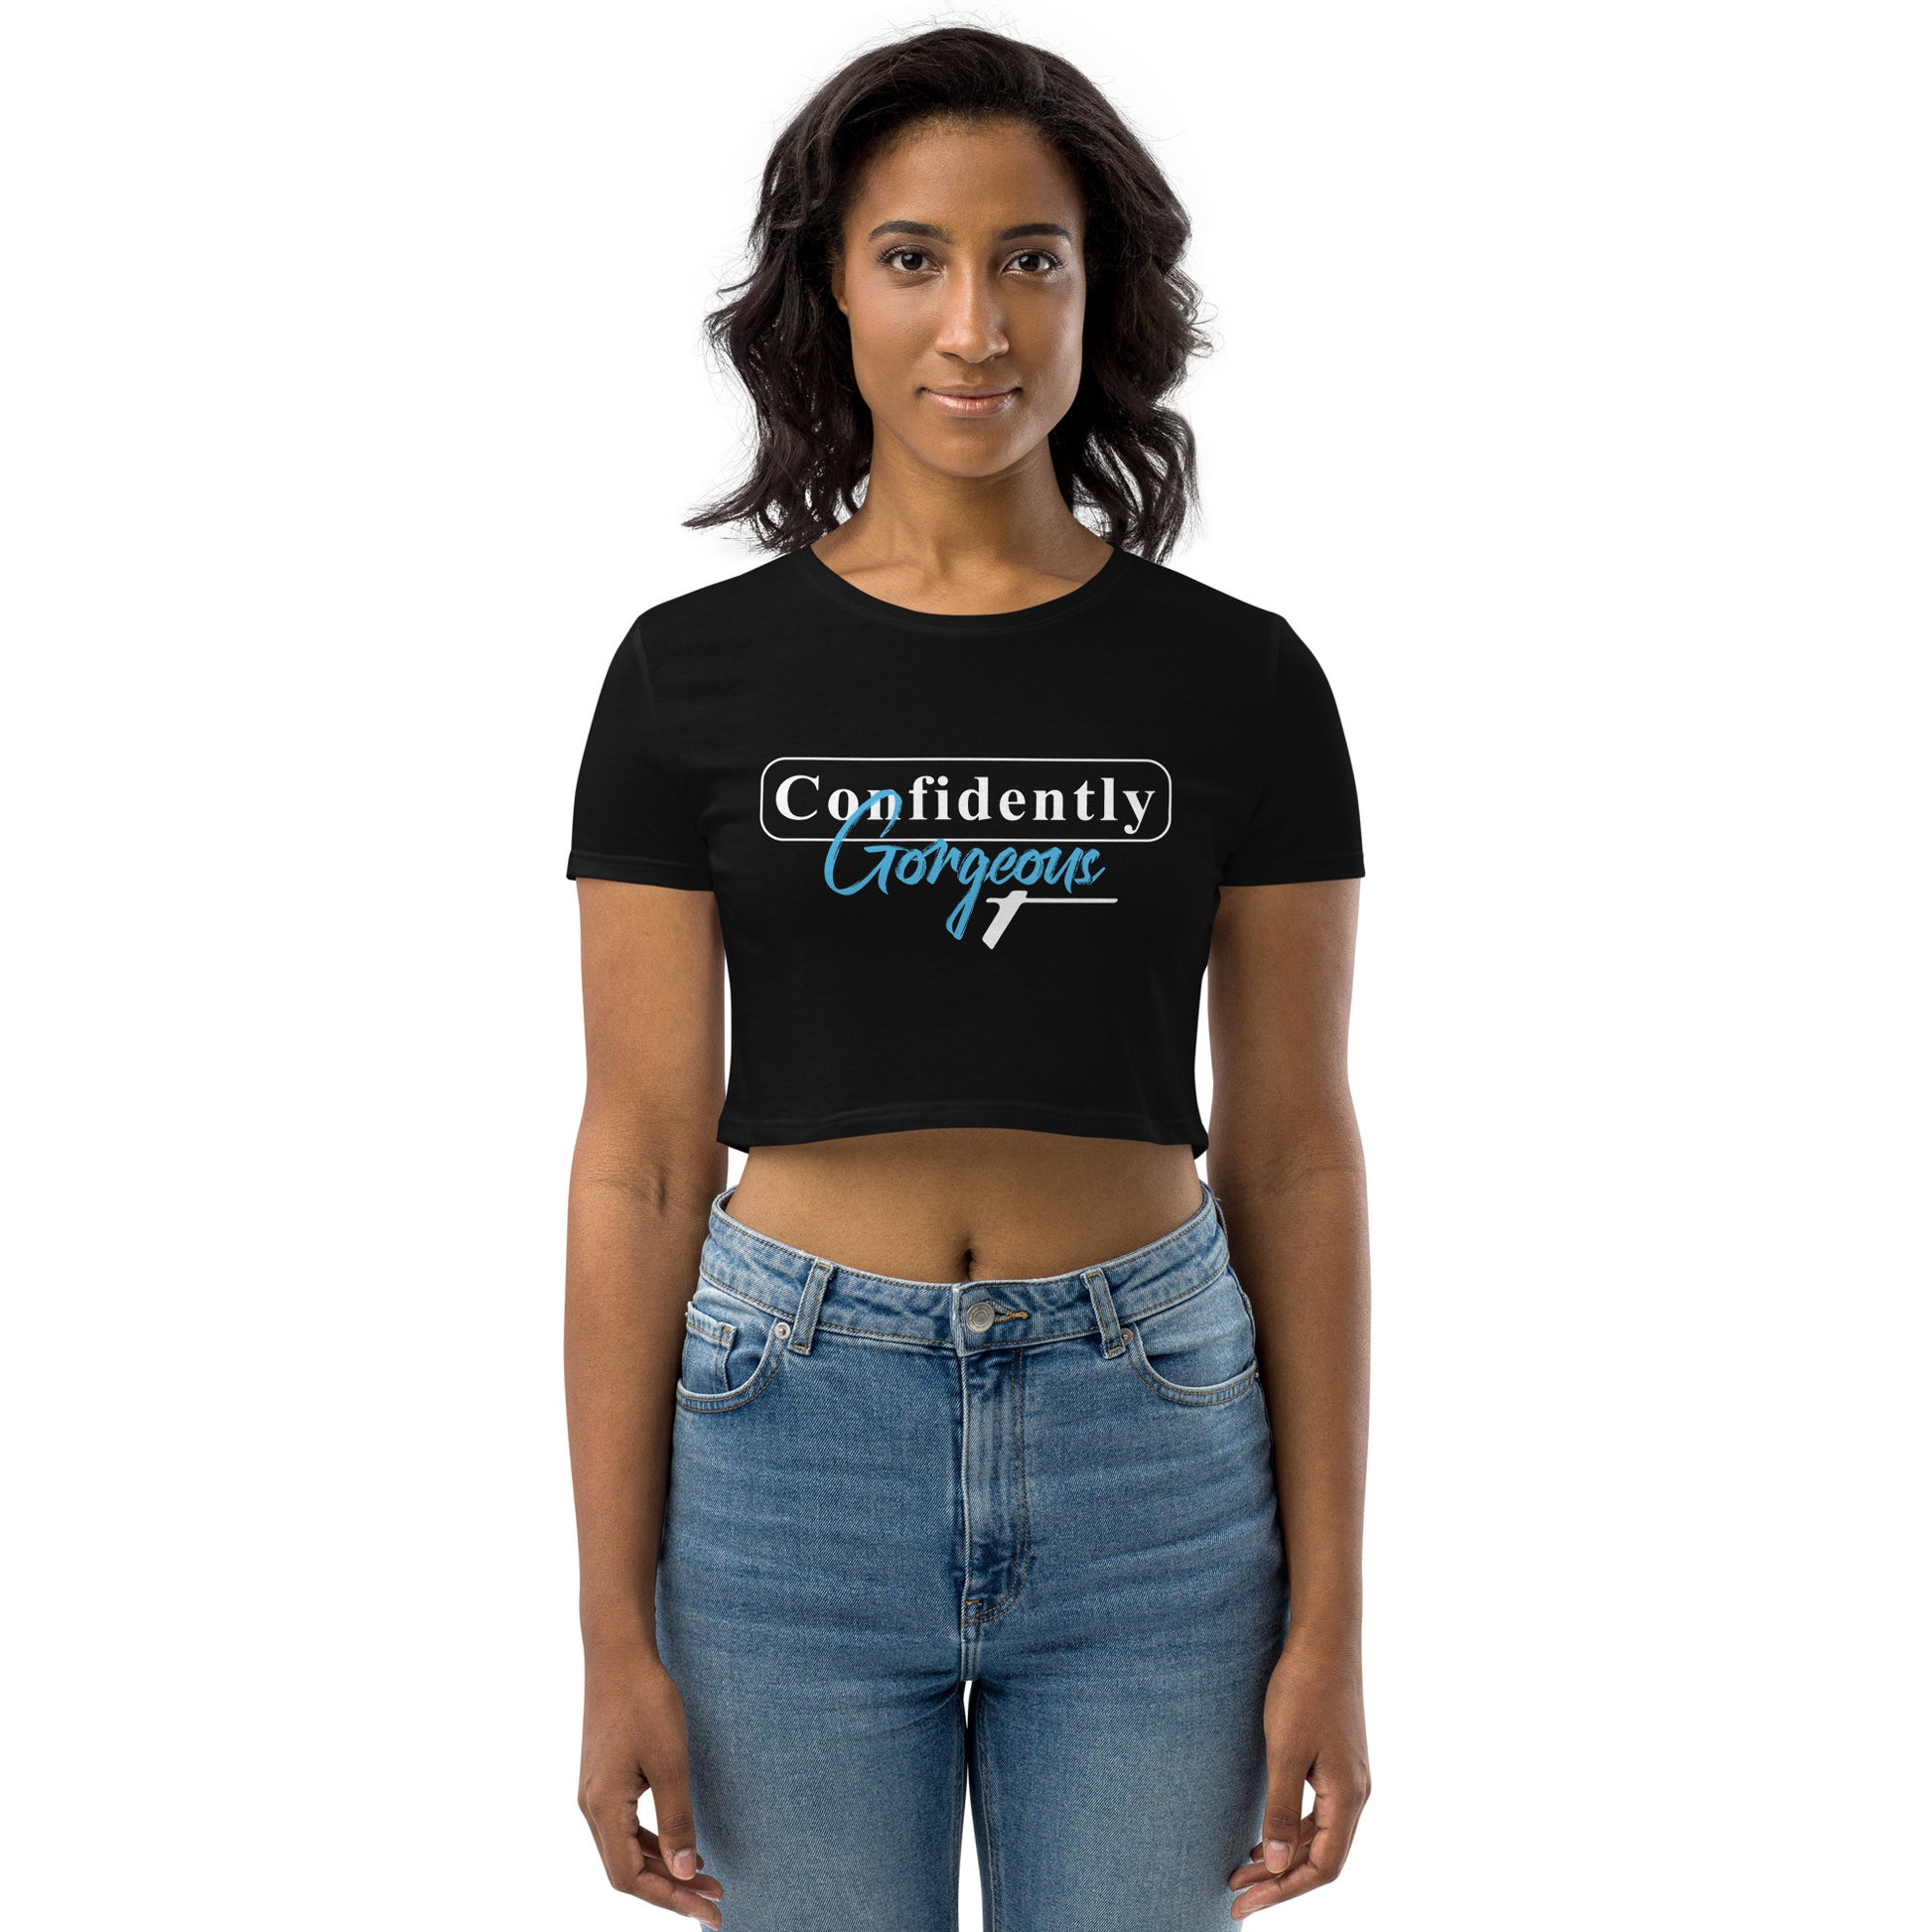 TRA "CONFIDENTLY GORGEOUS" Organic Crop Top - Trained Ready Armed Apparel